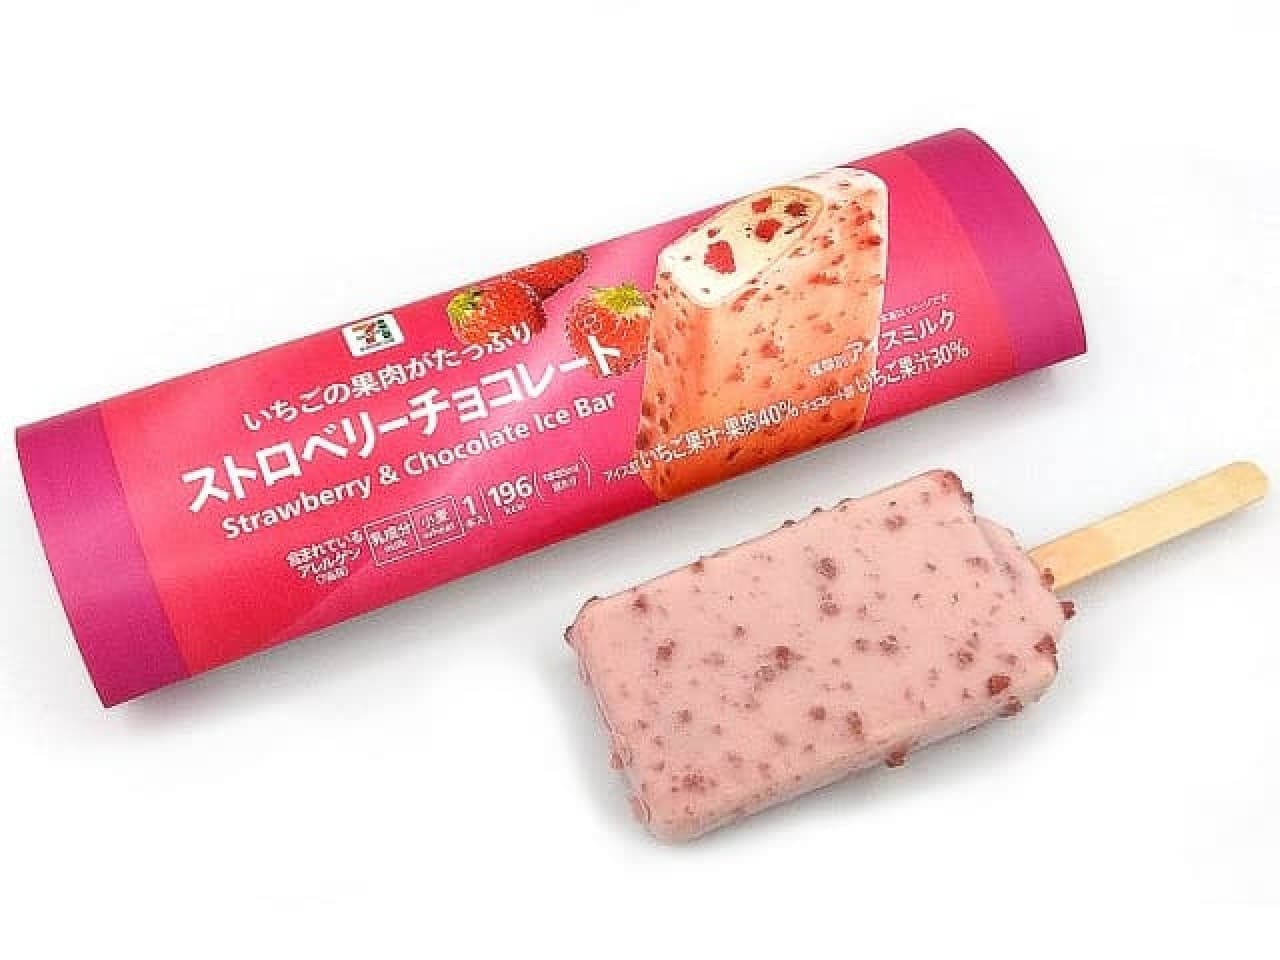 7-ELEVEN New Arrival Sweets "7P Strawberry Chocolate Ice Cream Bar"